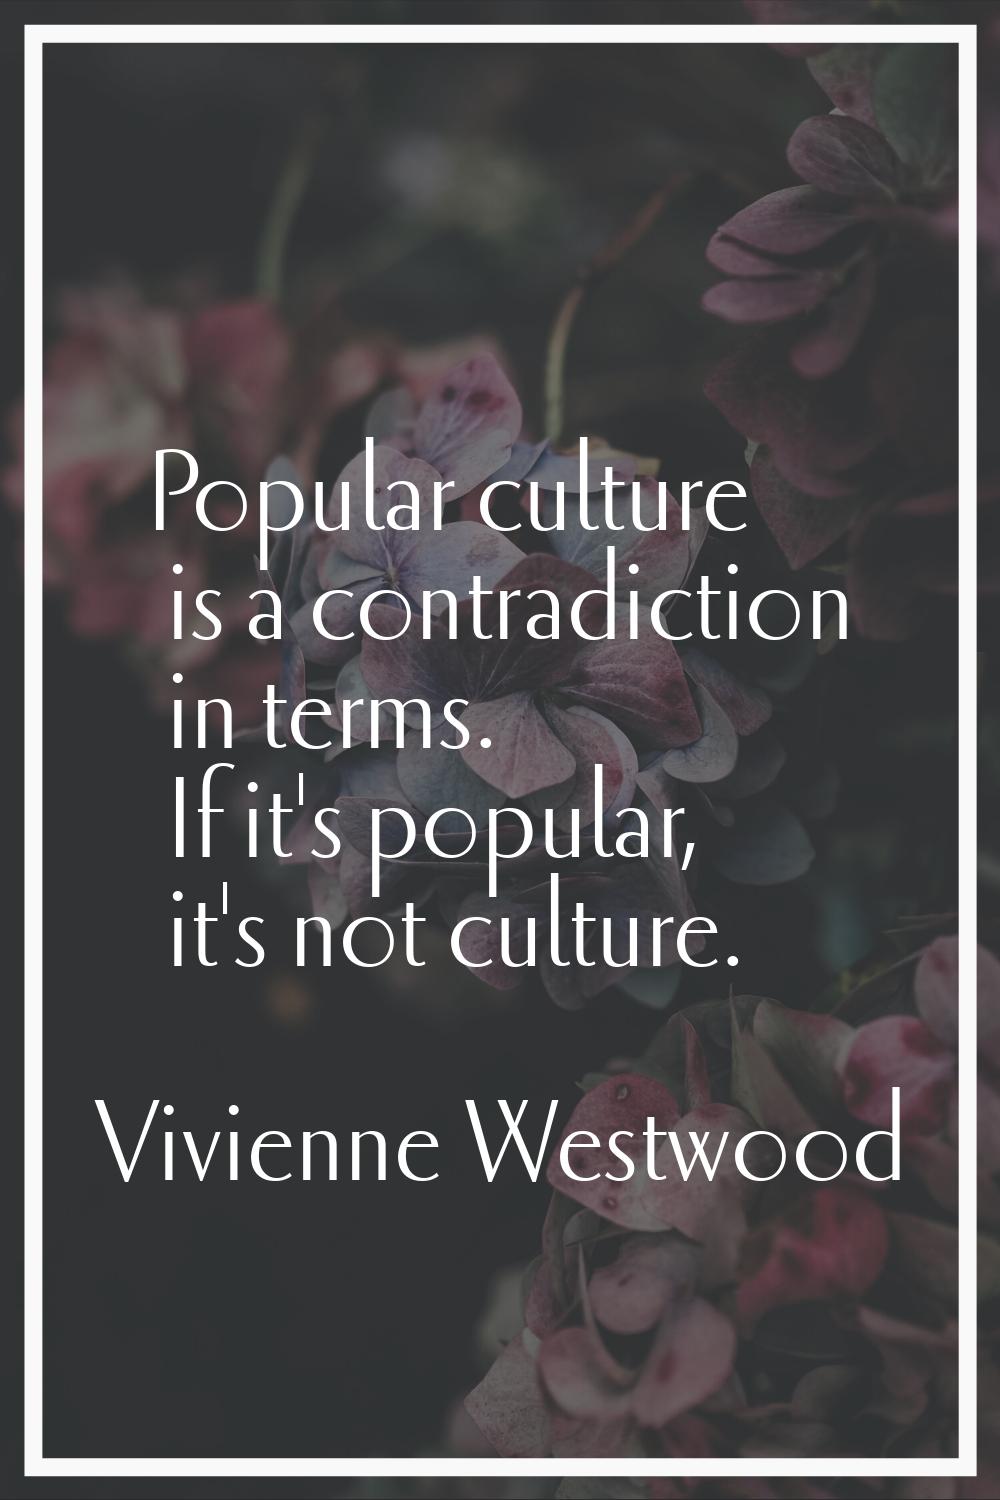 Popular culture is a contradiction in terms. If it's popular, it's not culture.